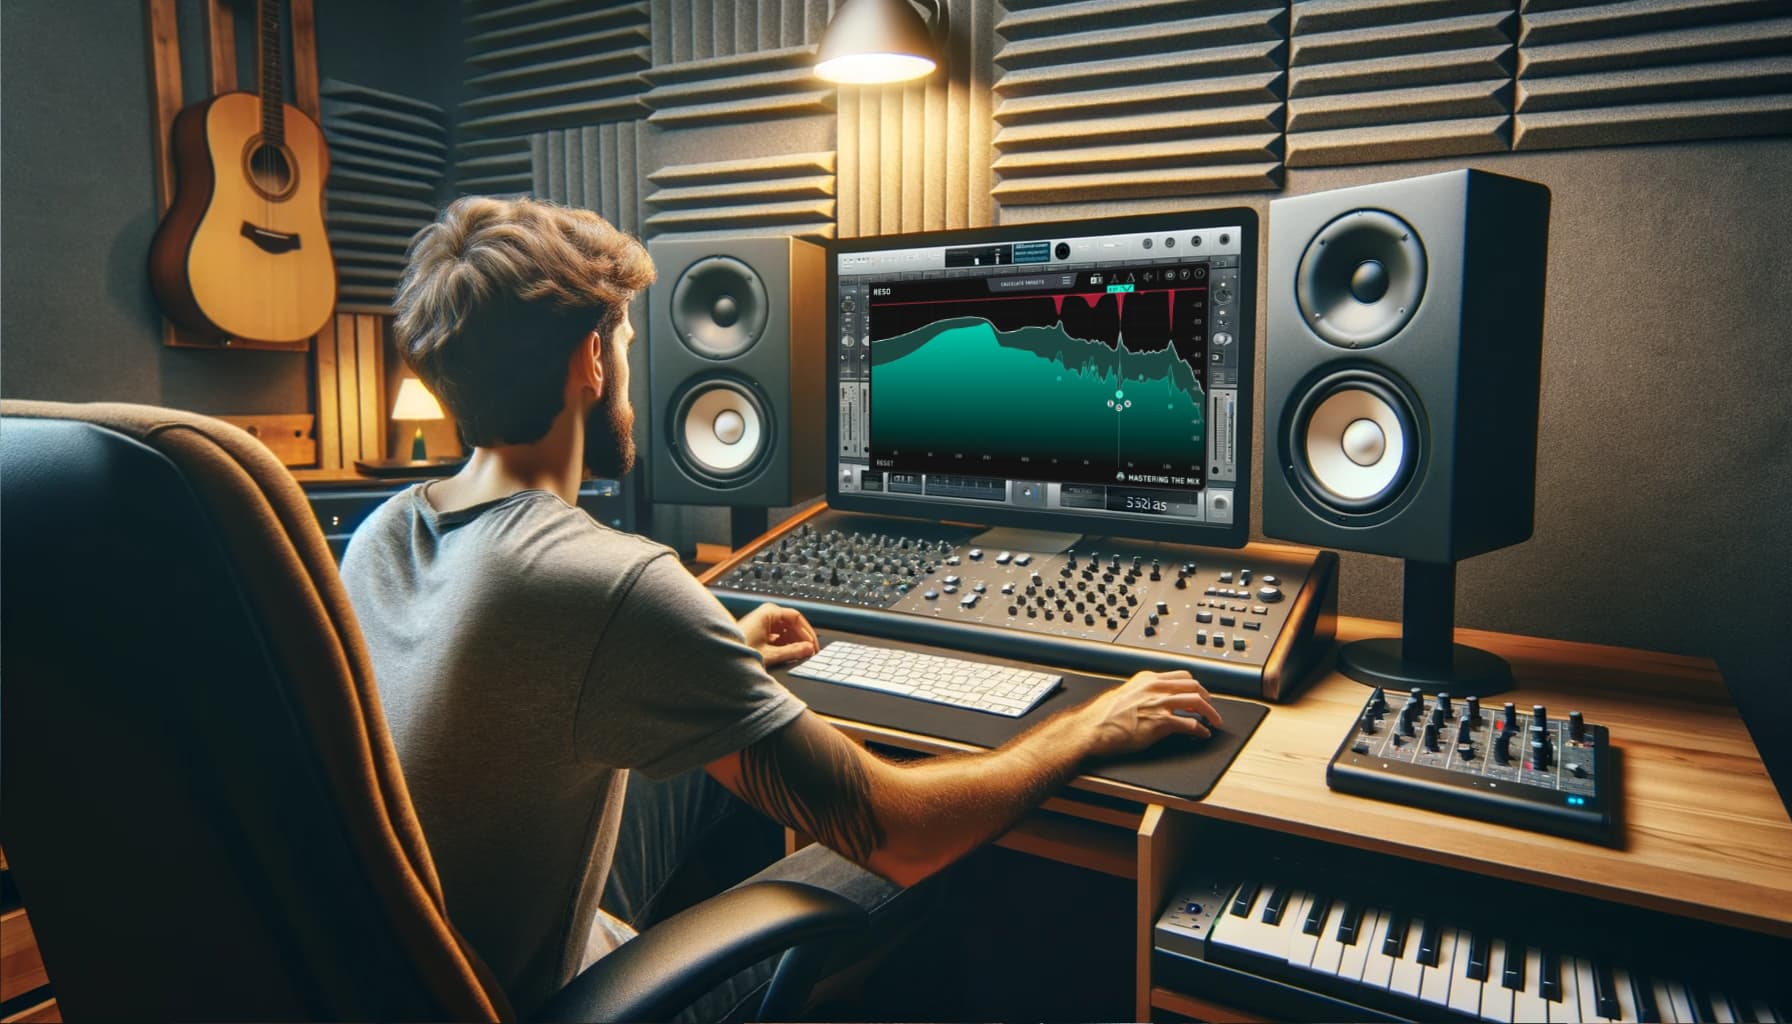 A panoramic image of a music producer in a home studio setting, working on mastering a track on a digital audio workstation (DAW)